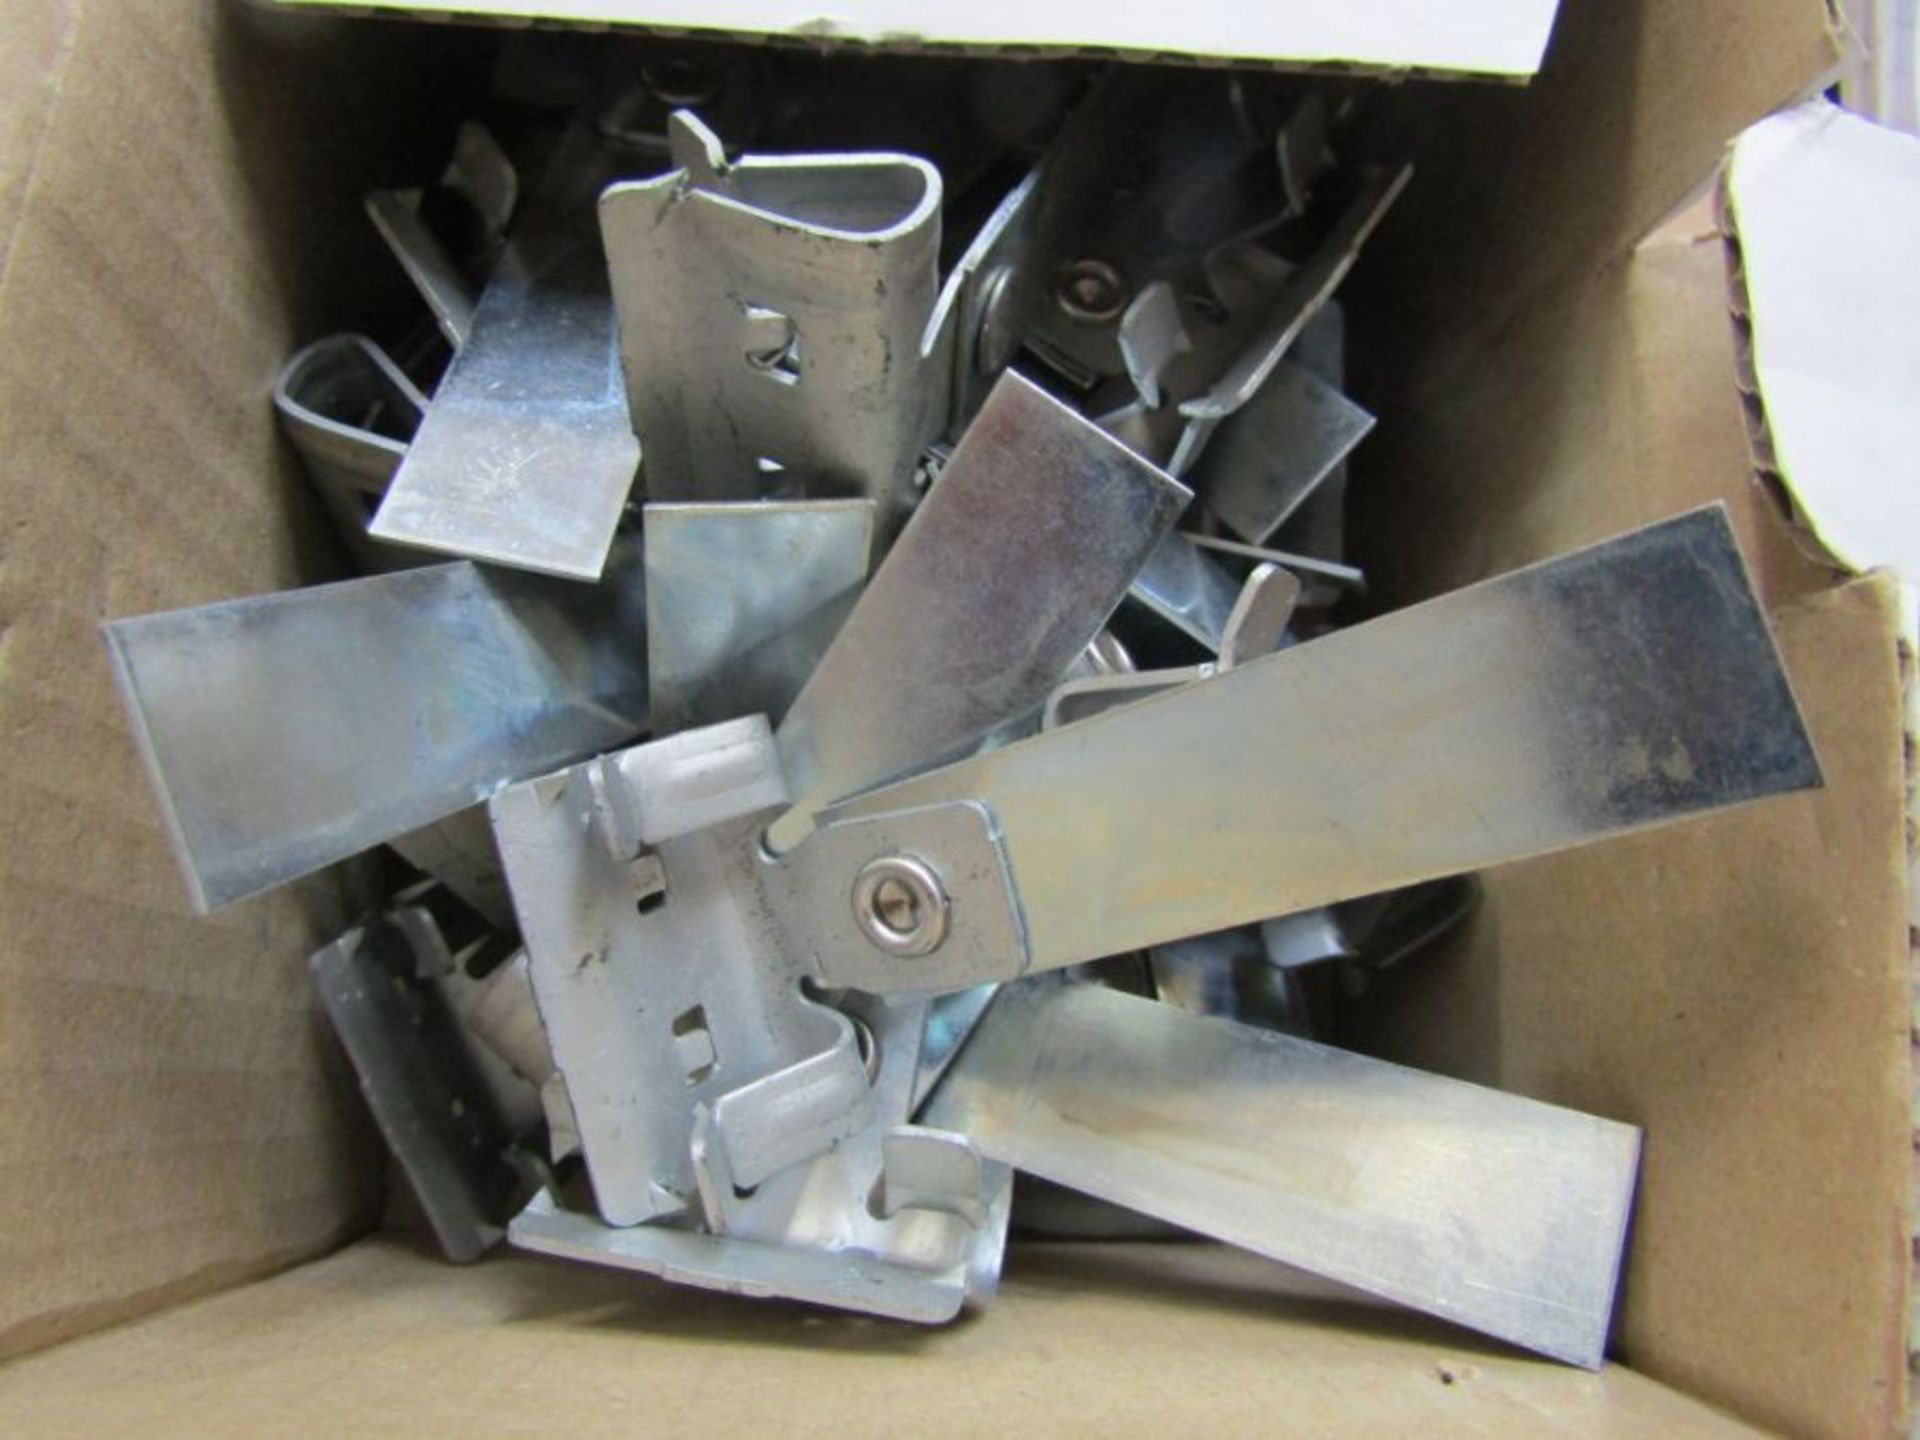 6 x Pack of 25 Galvanised Steel Cable Clip, 58mm Max. Bundle - (Zeta) - 377221 - Image 3 of 4